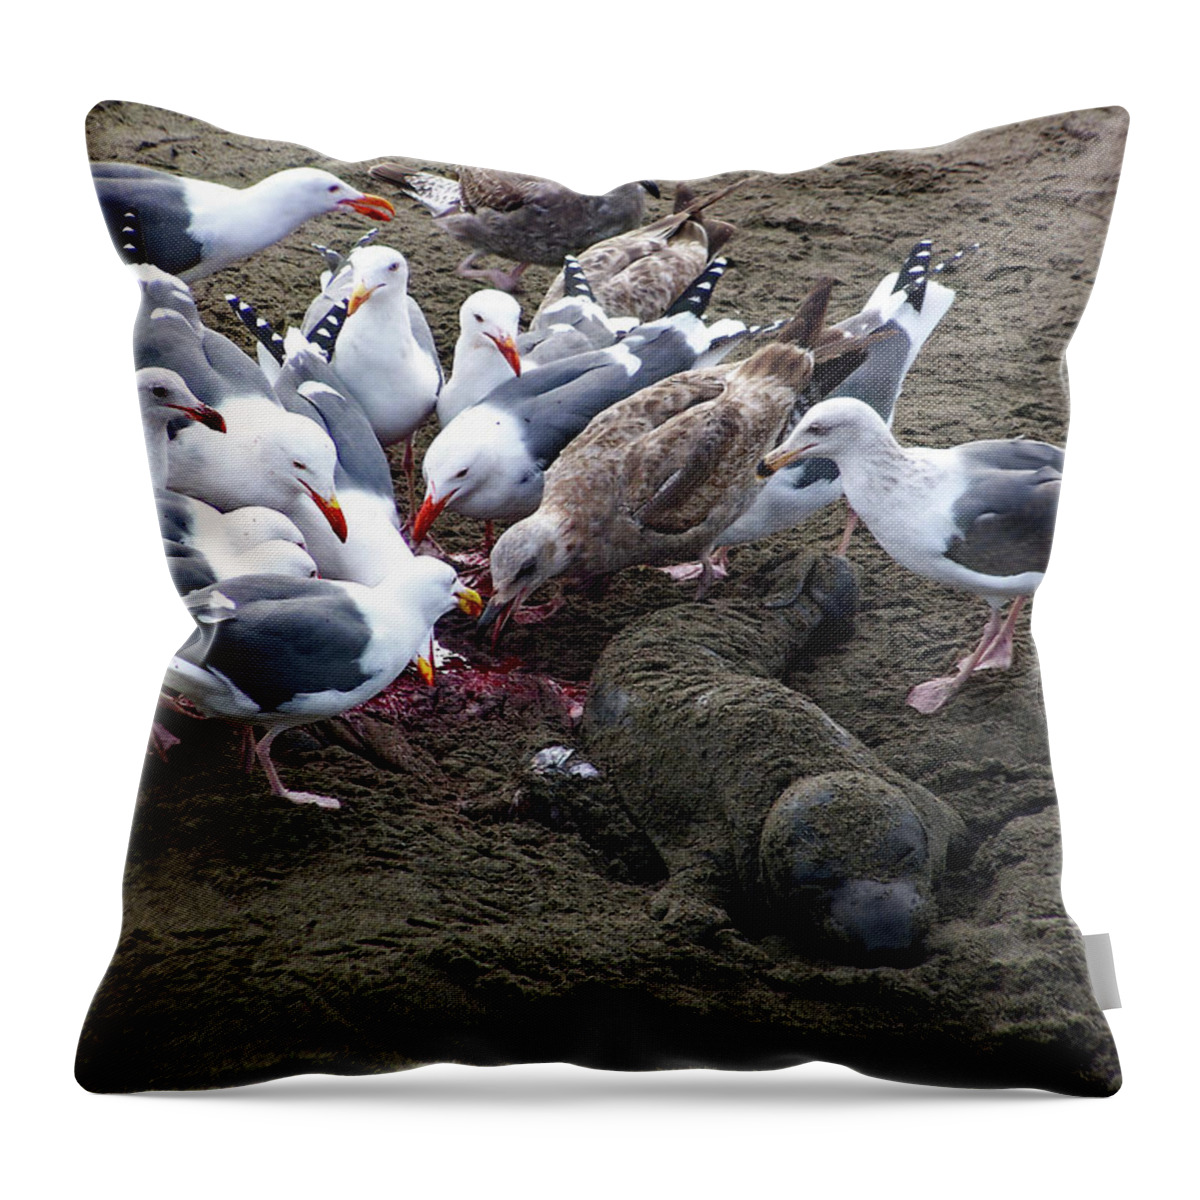 The Feast Throw Pillow featuring the photograph The Feast by Jennifer Robin